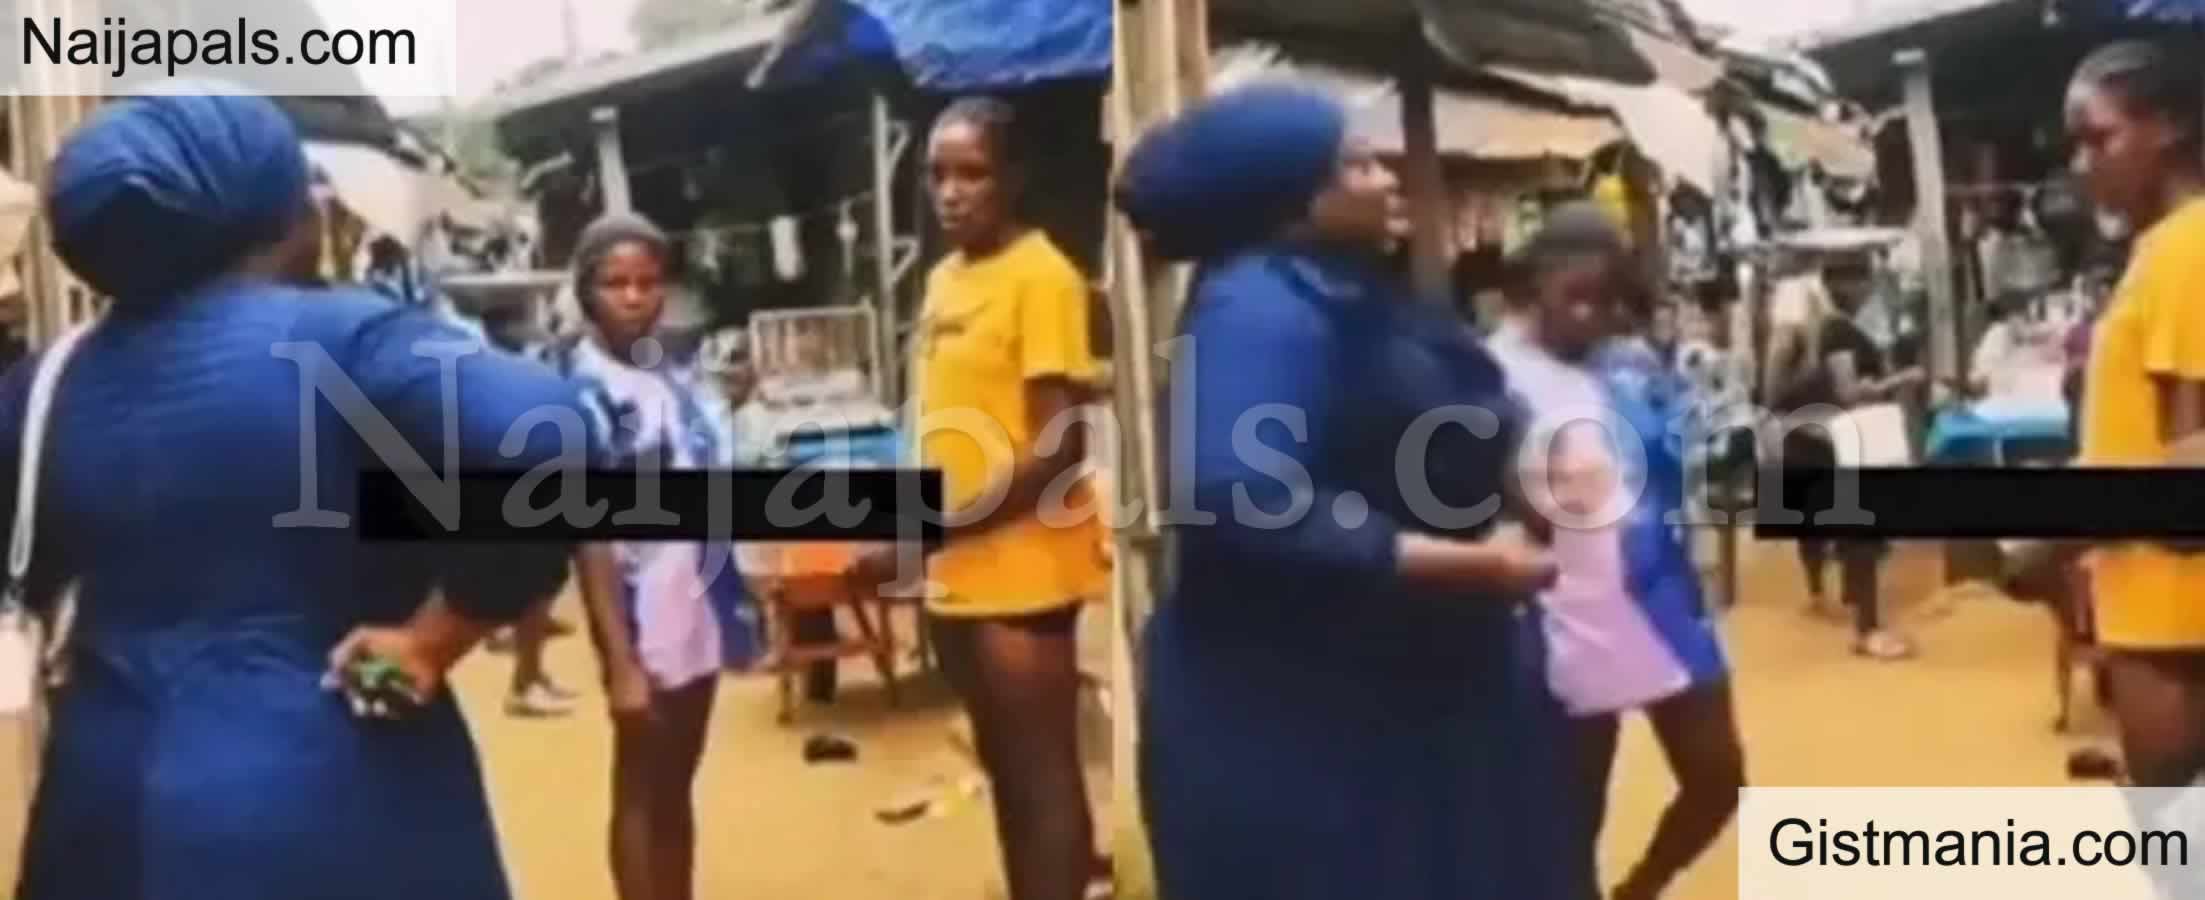 <img alt='.' class='lazyload' data-src='https://img.gistmania.com/emot/video.gif' /> <b>Watch As Female Evangelist Aggressively Confronts Young Girls in Market Over Indecent Dressing</b>